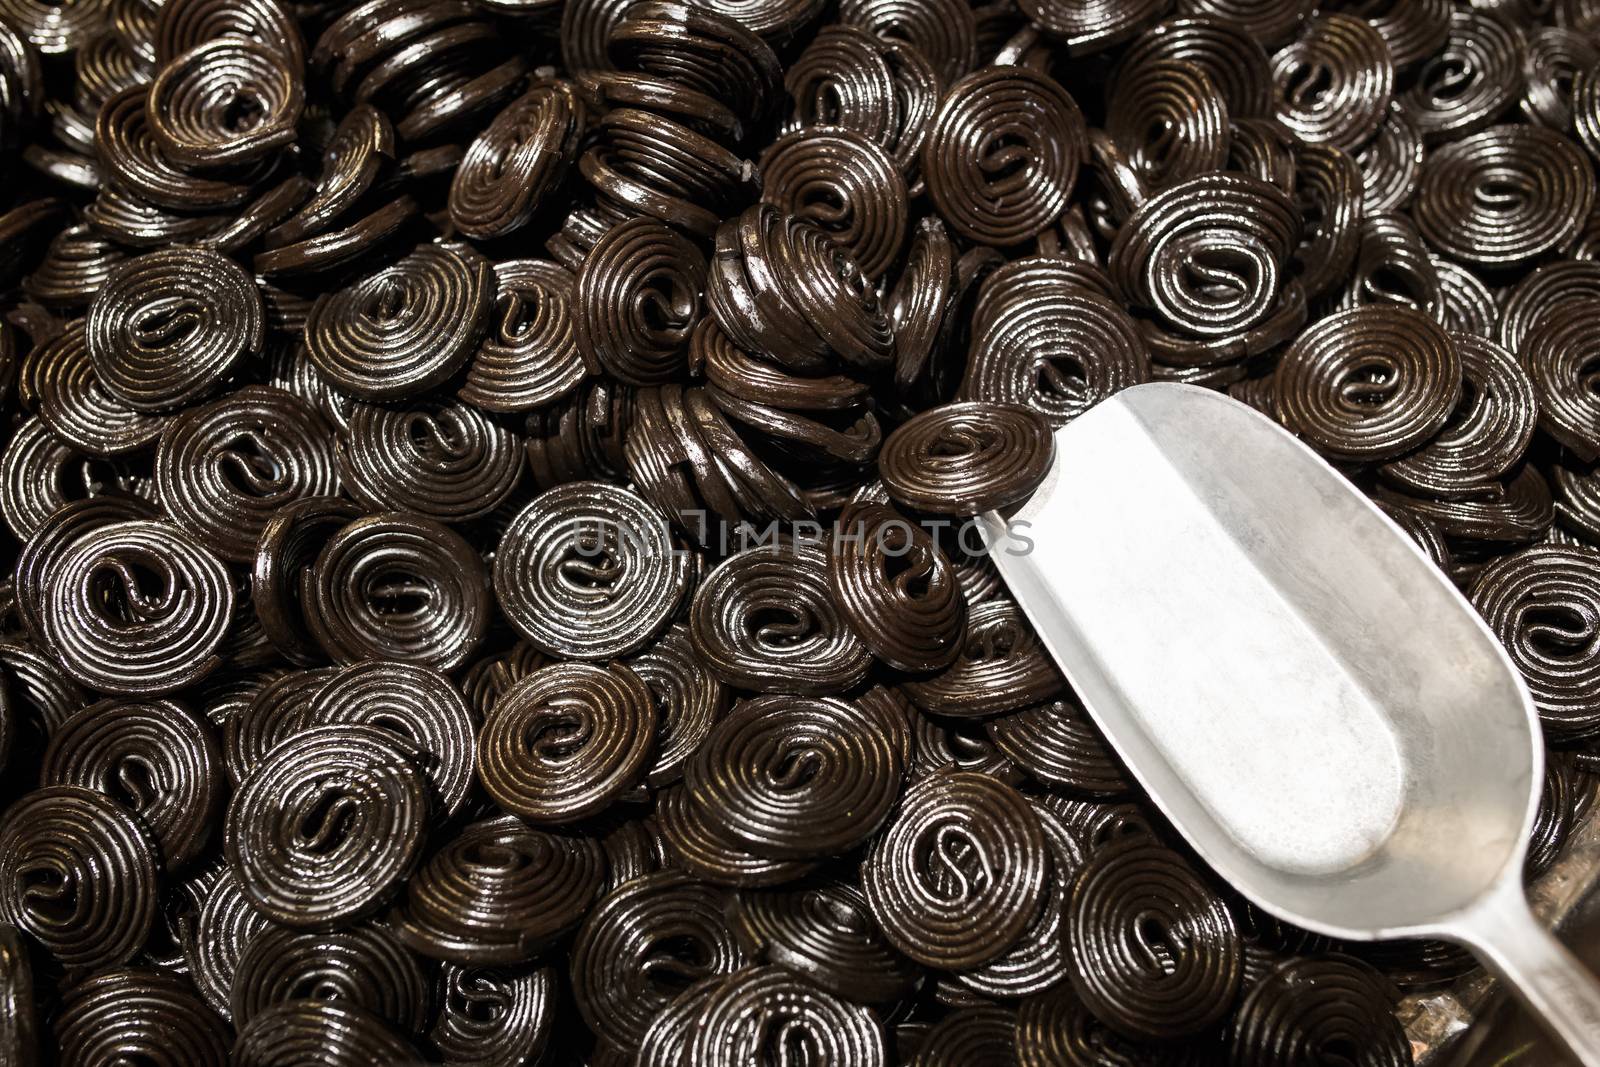 Black Twisted Spiral Jelly you can buy ina candy store.